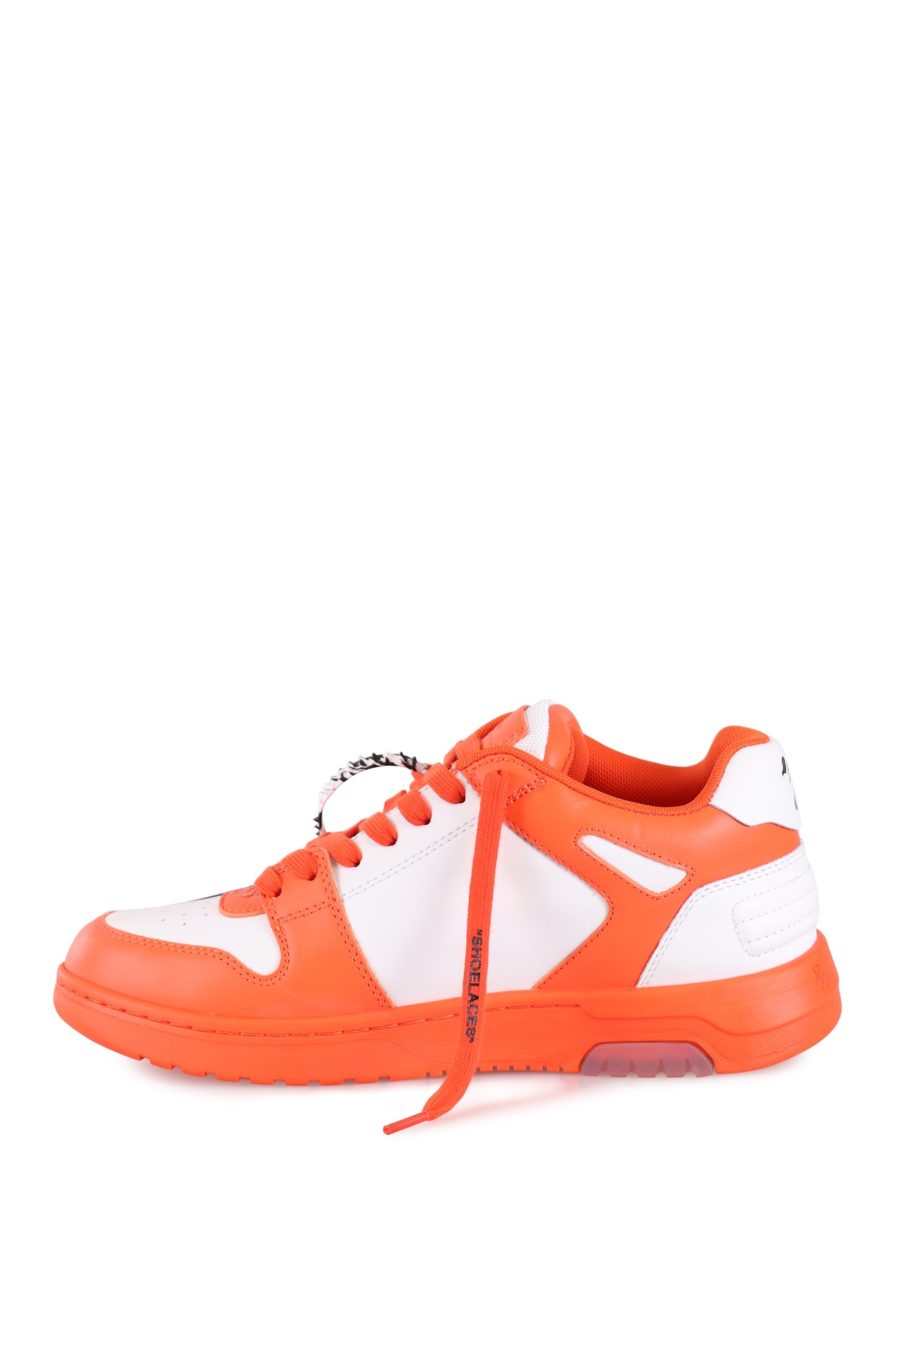 Turnschuhe Off-White "out of office" weiß mit orange - ee09896a6e210ccaae8727d35211009c46a4ea4d